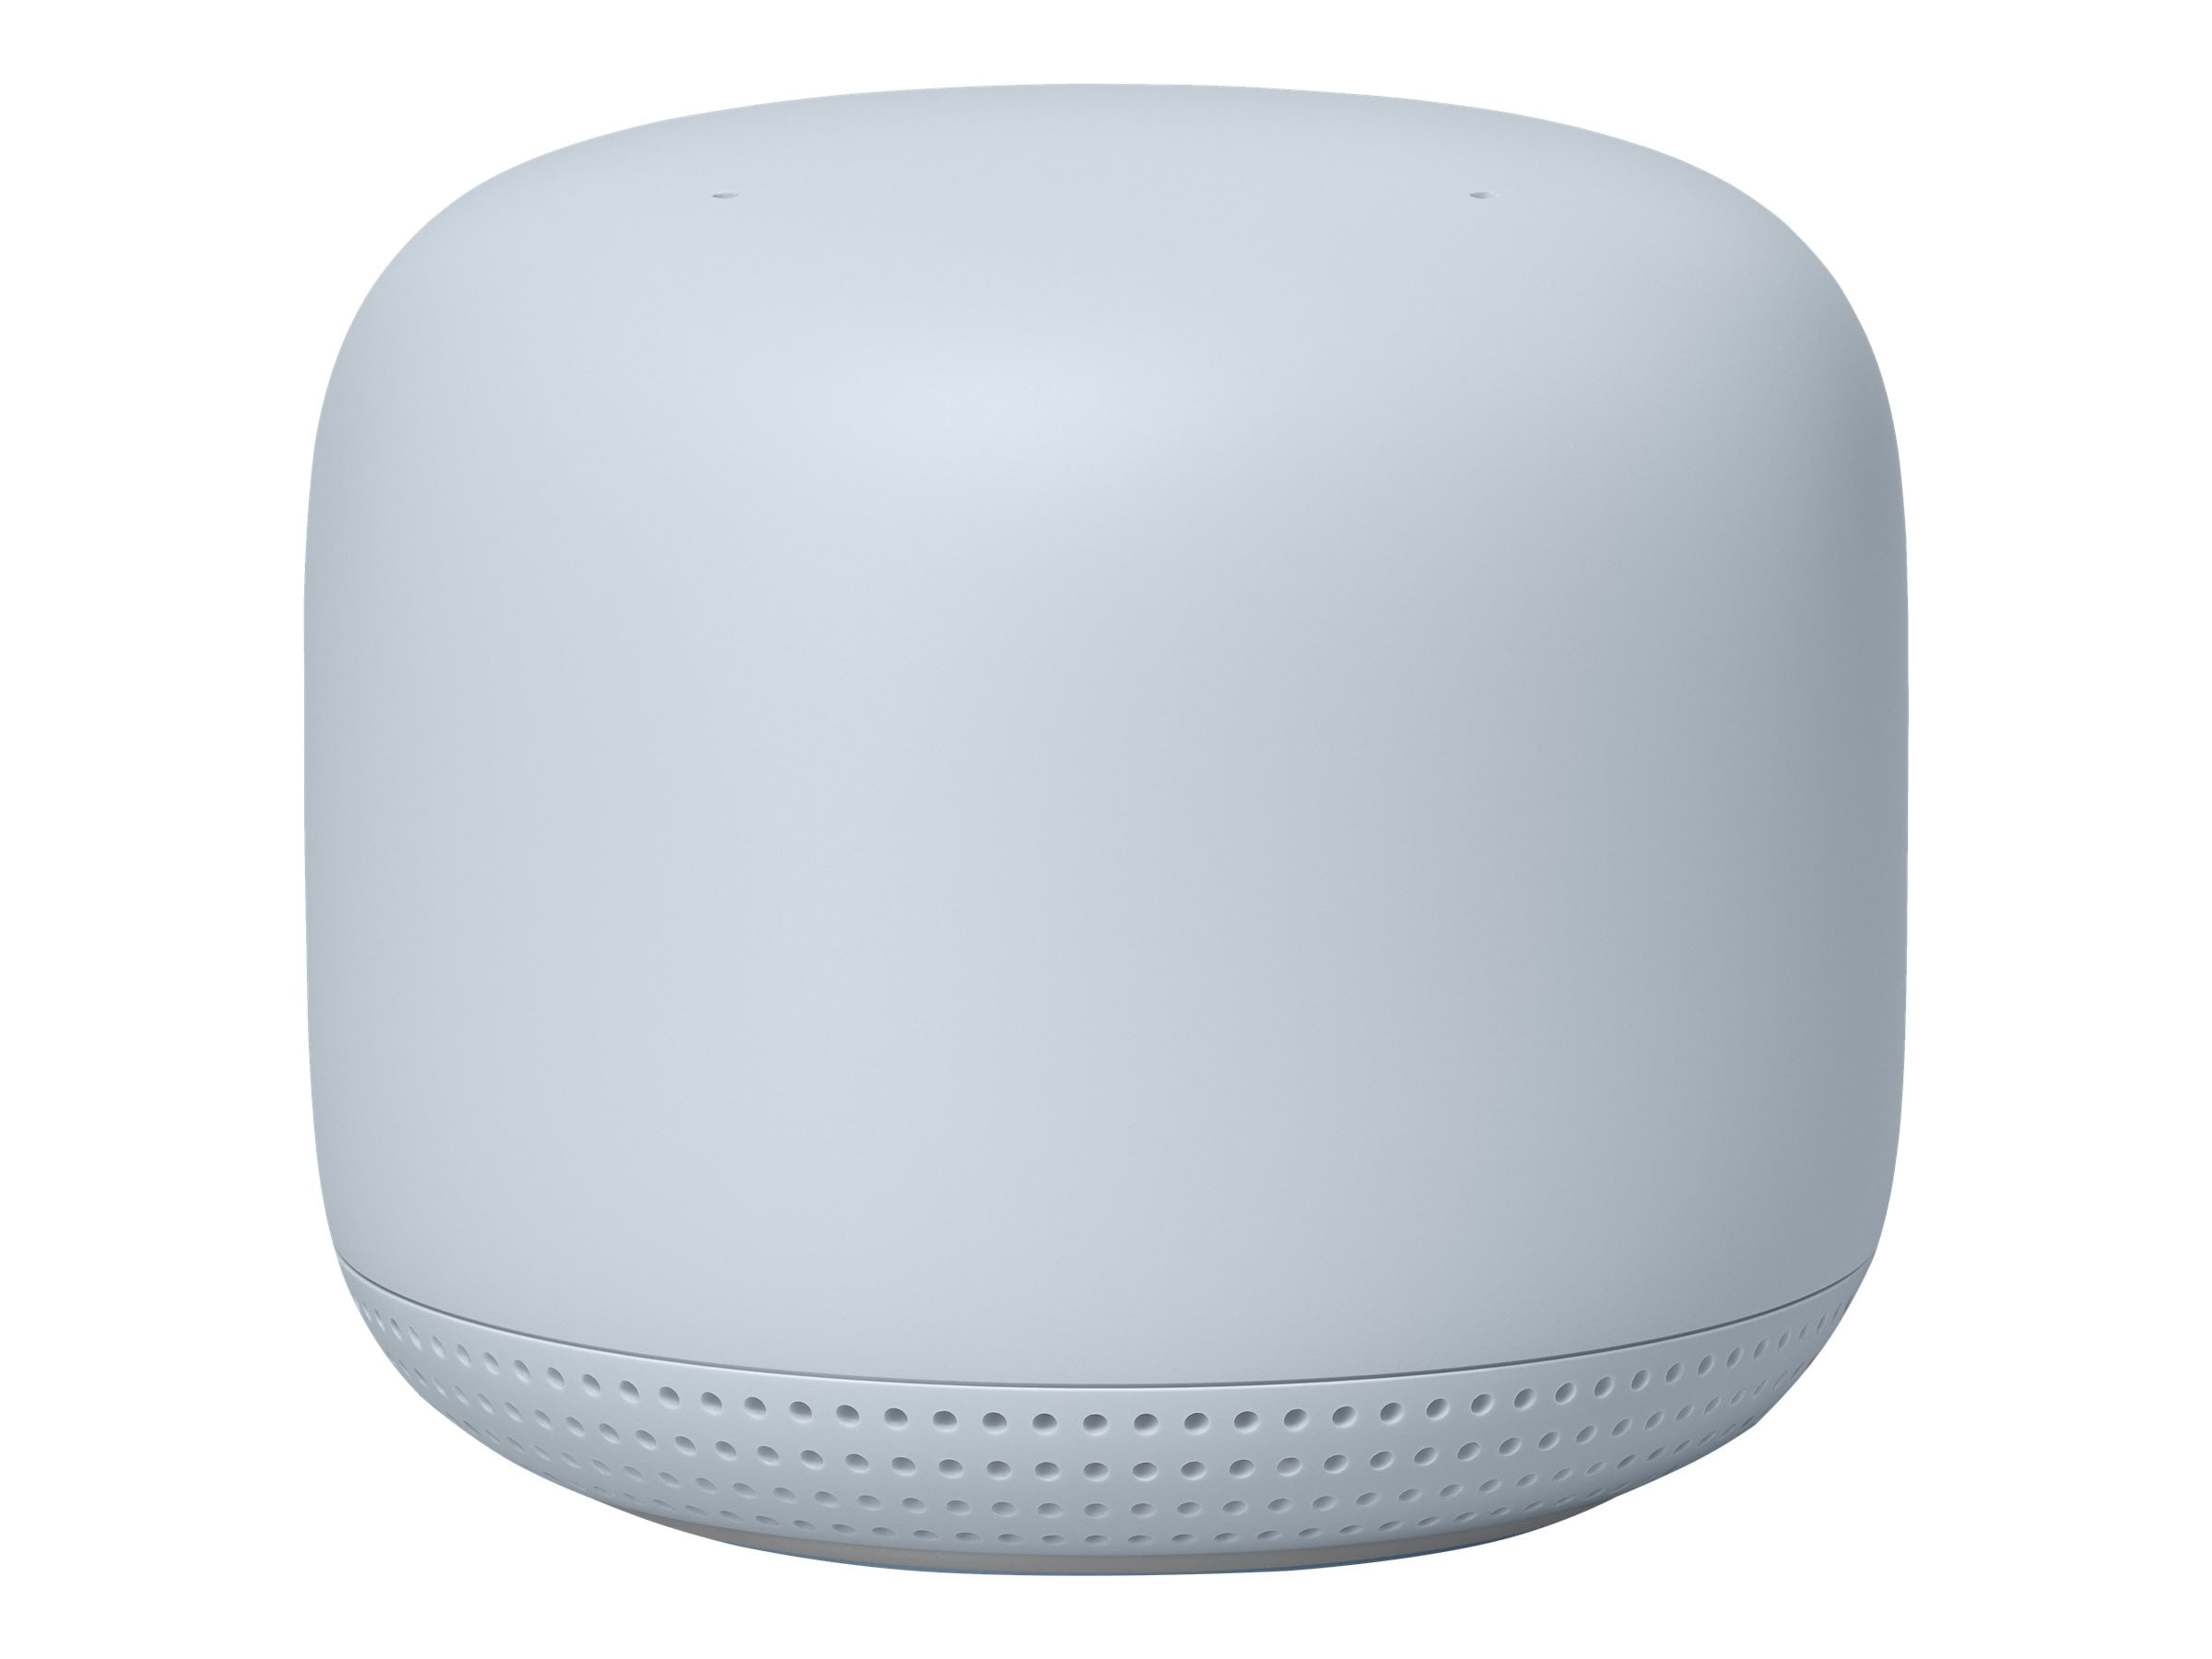 Google Nest Wifi - Add-on - Wi-Fi system (extender) - up to 1,600 sq.ft